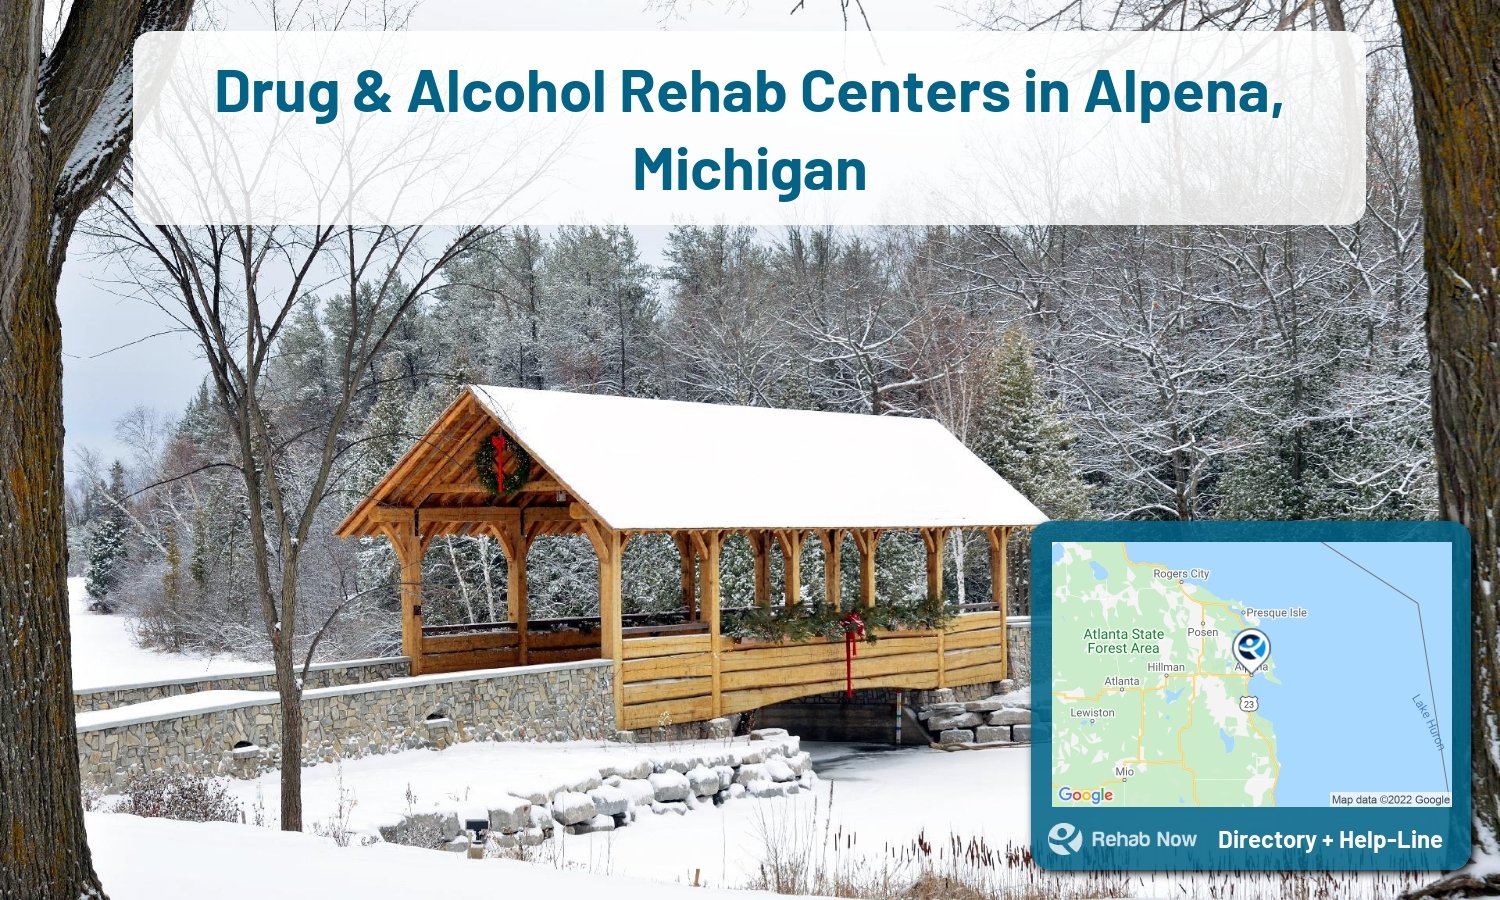 Our experts can help you find treatment now in Alpena, Michigan. We list drug rehab and alcohol centers in Michigan.